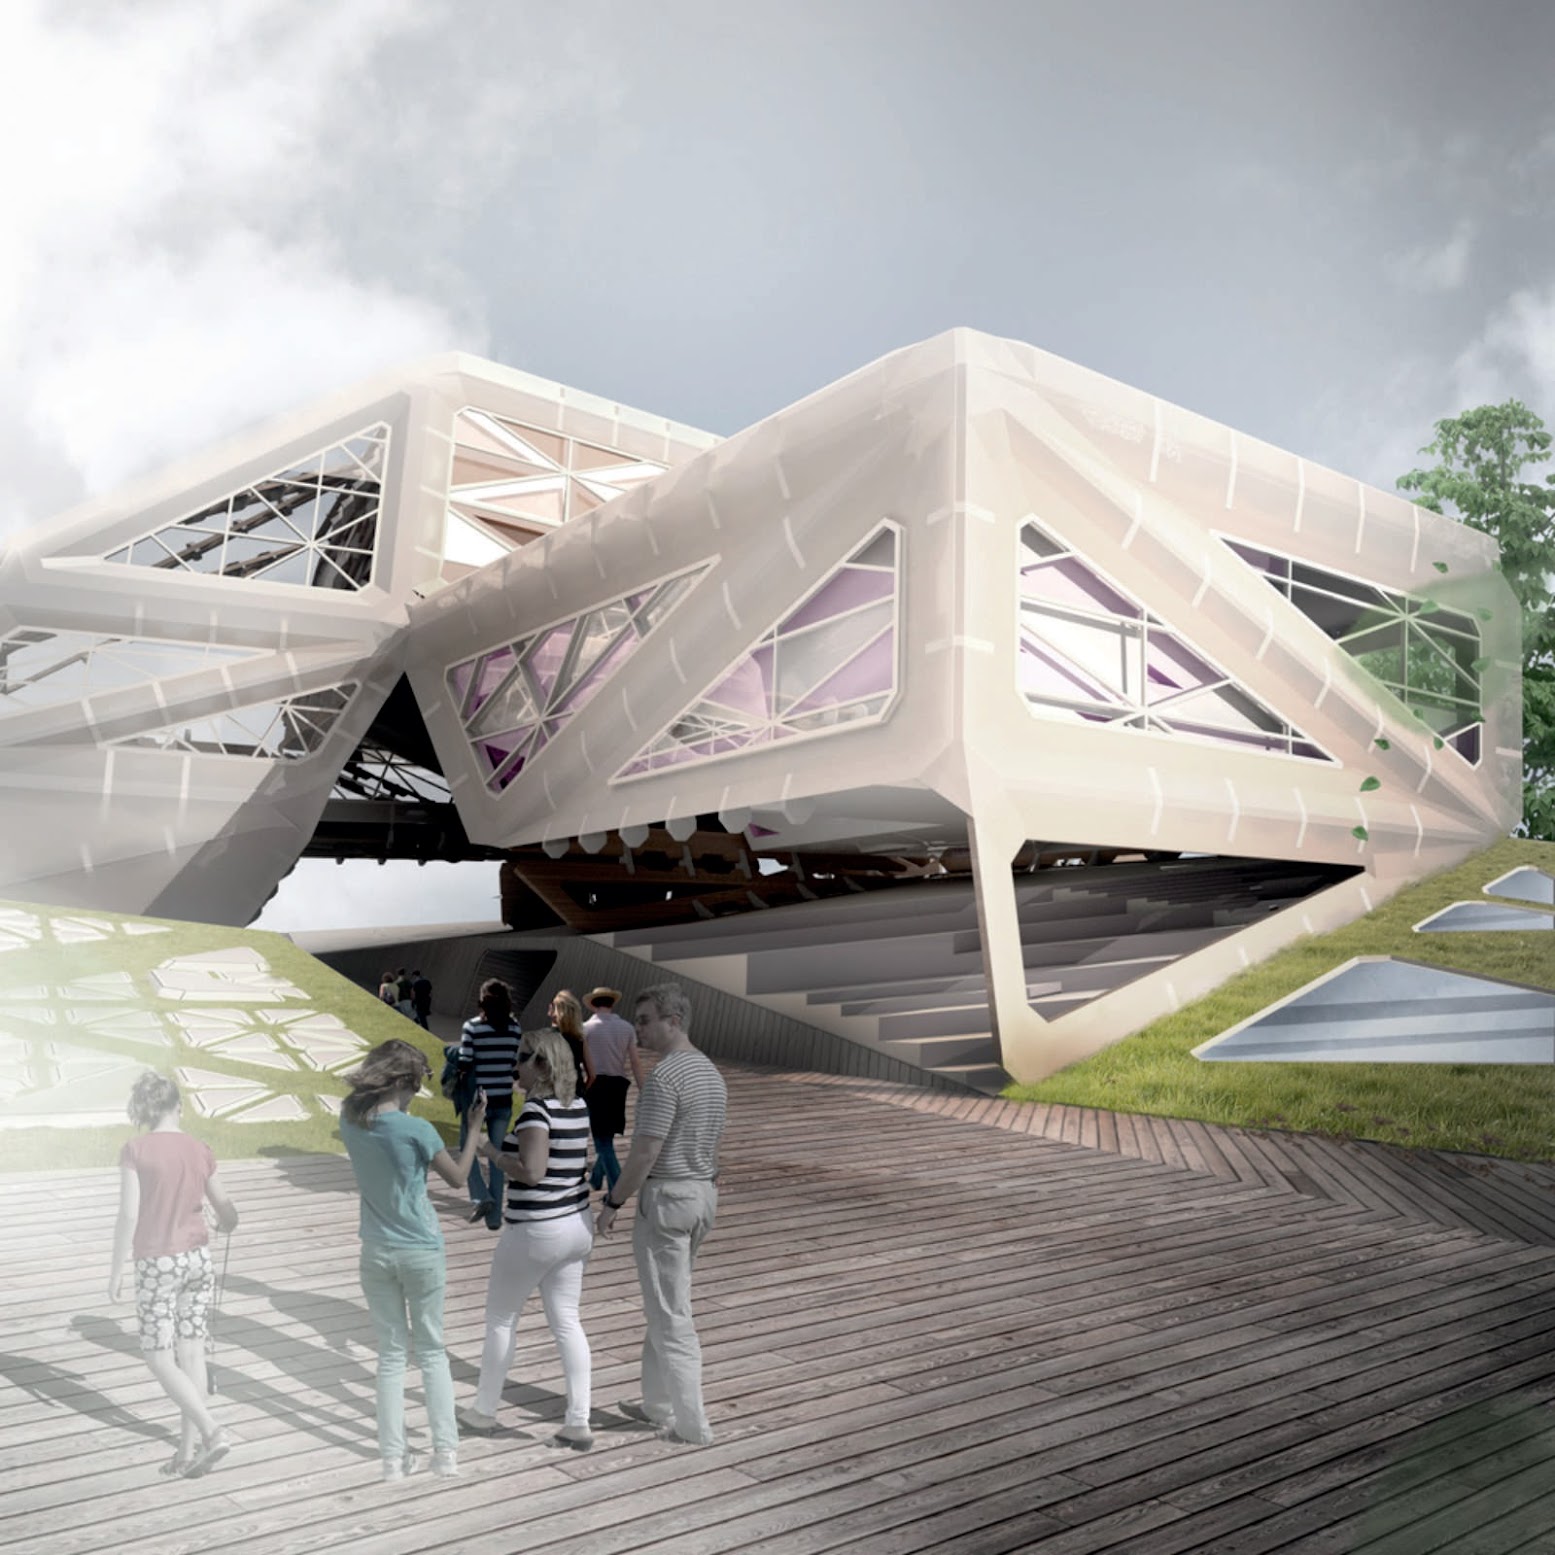 Almere Pampus Transferium by MetaStable Architecture